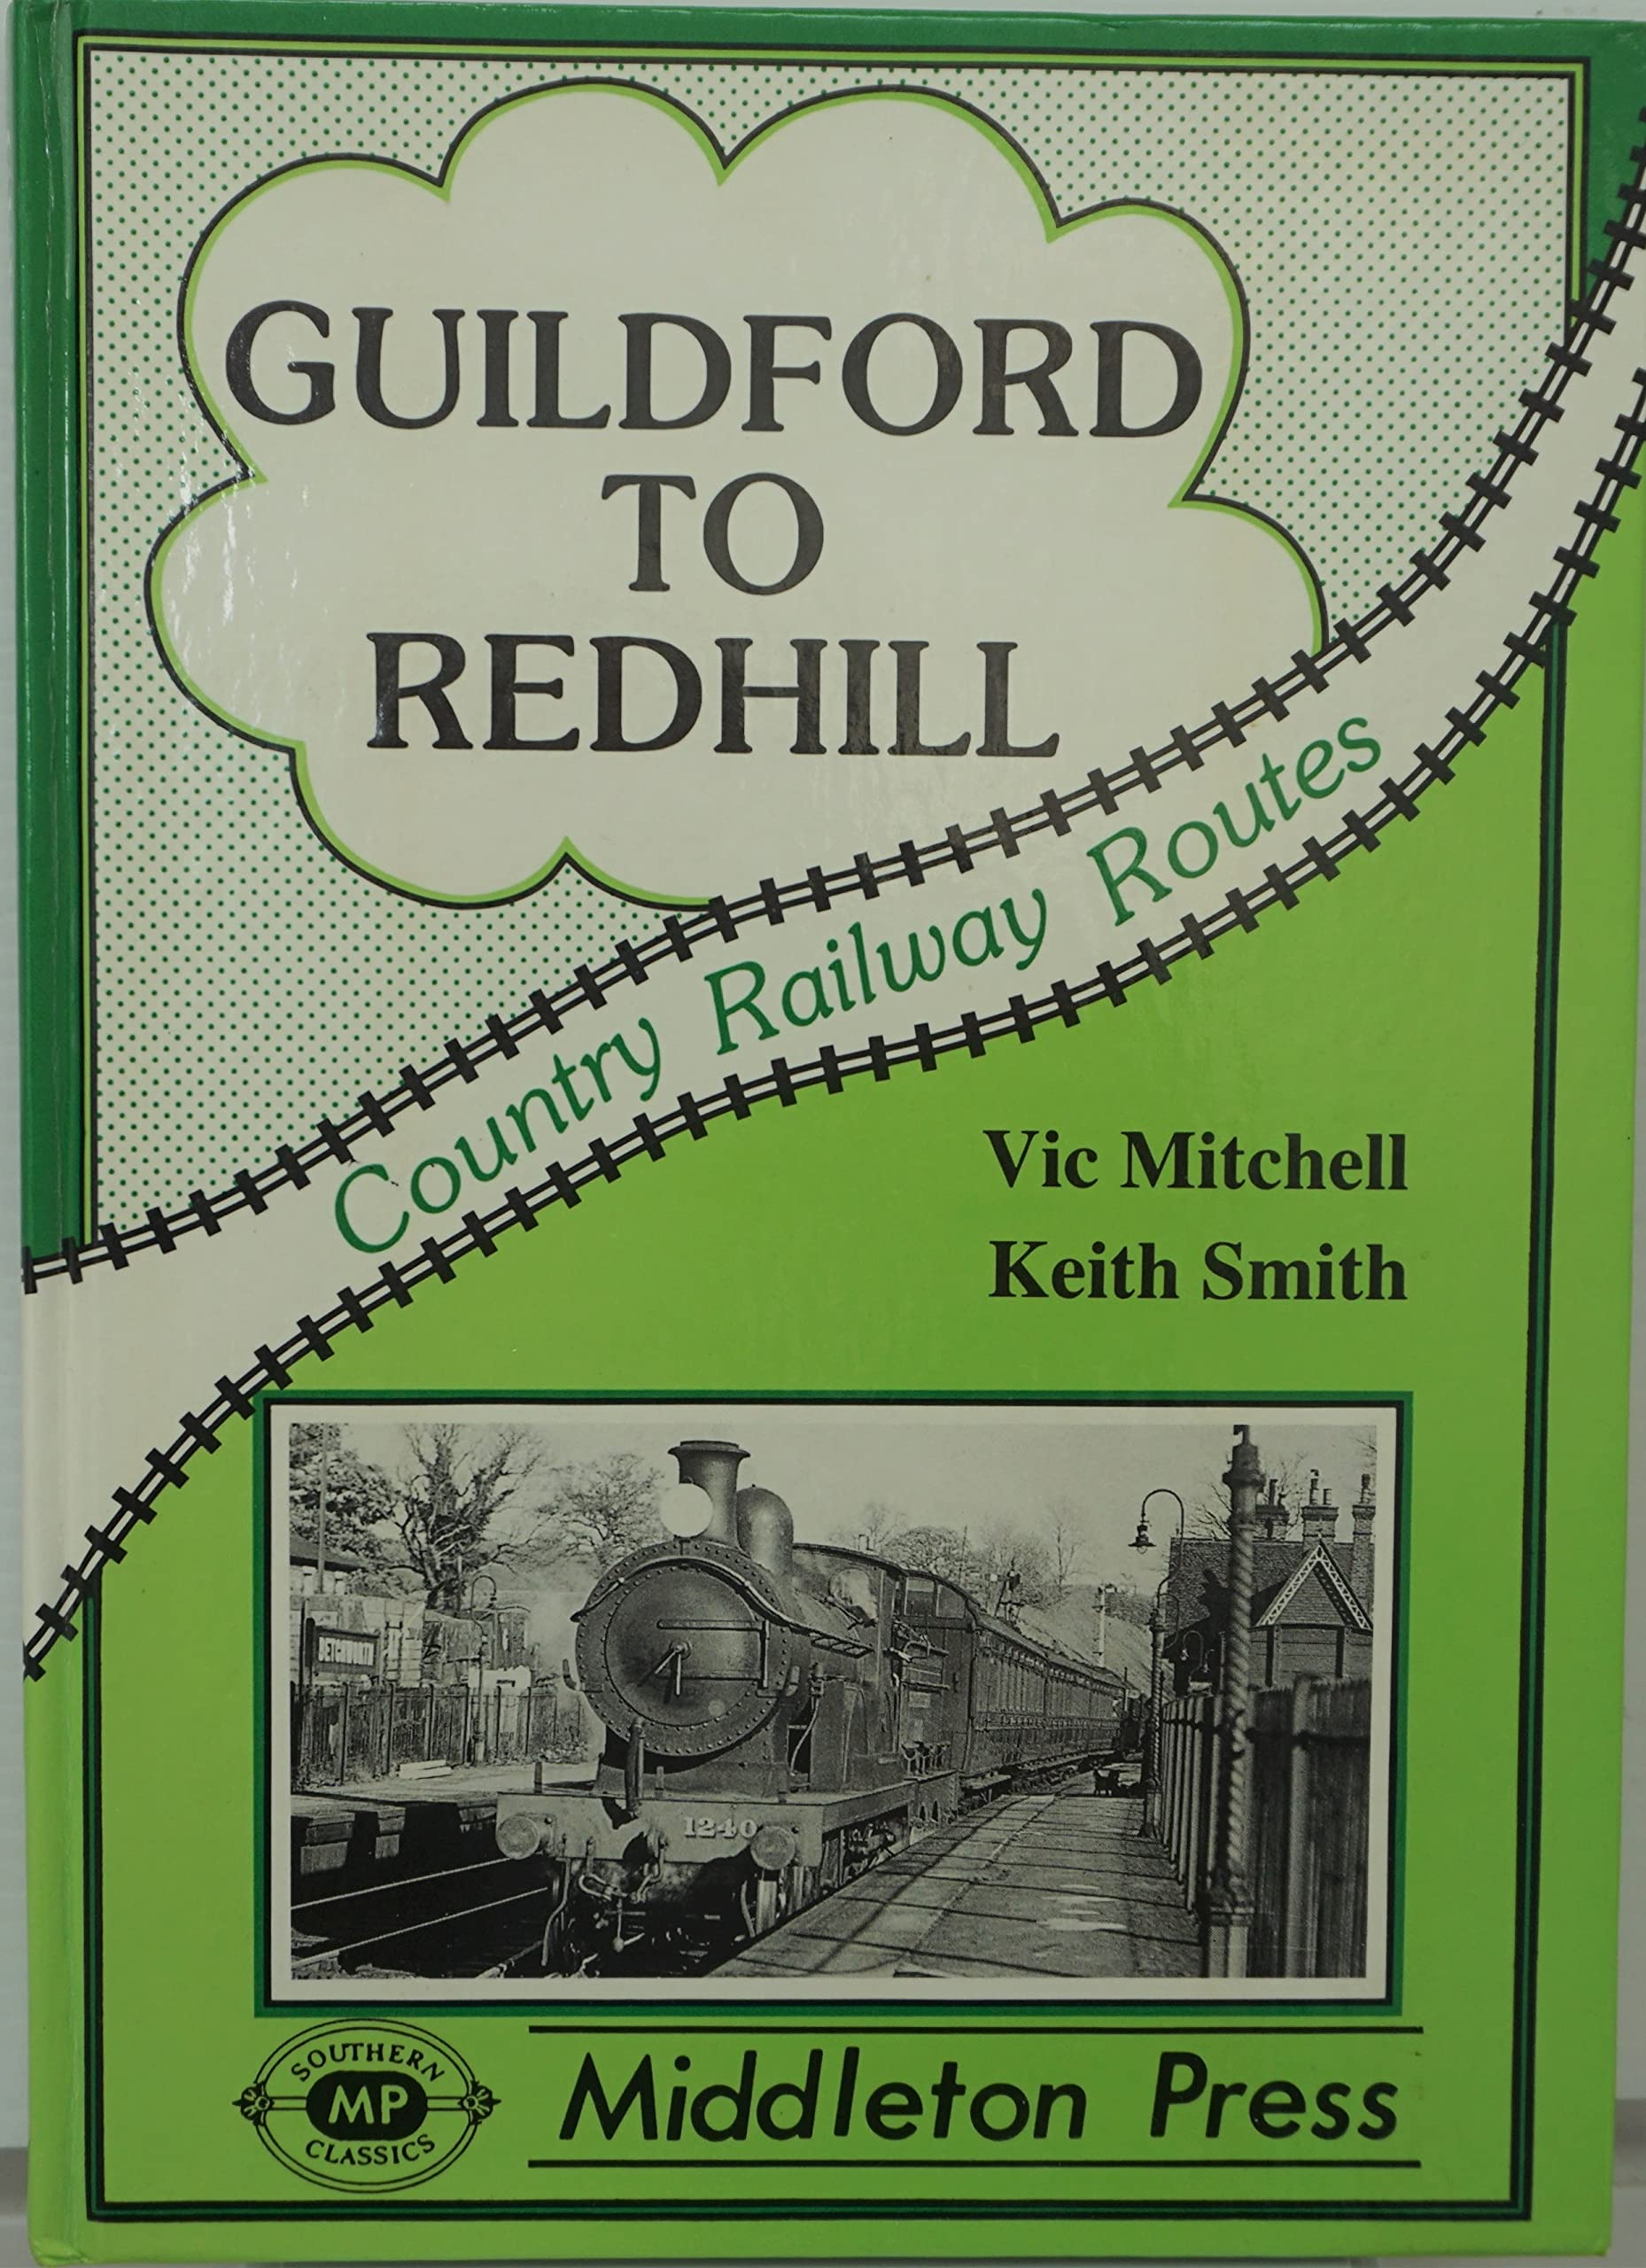 Country Railway Routes Guildford to Redhill